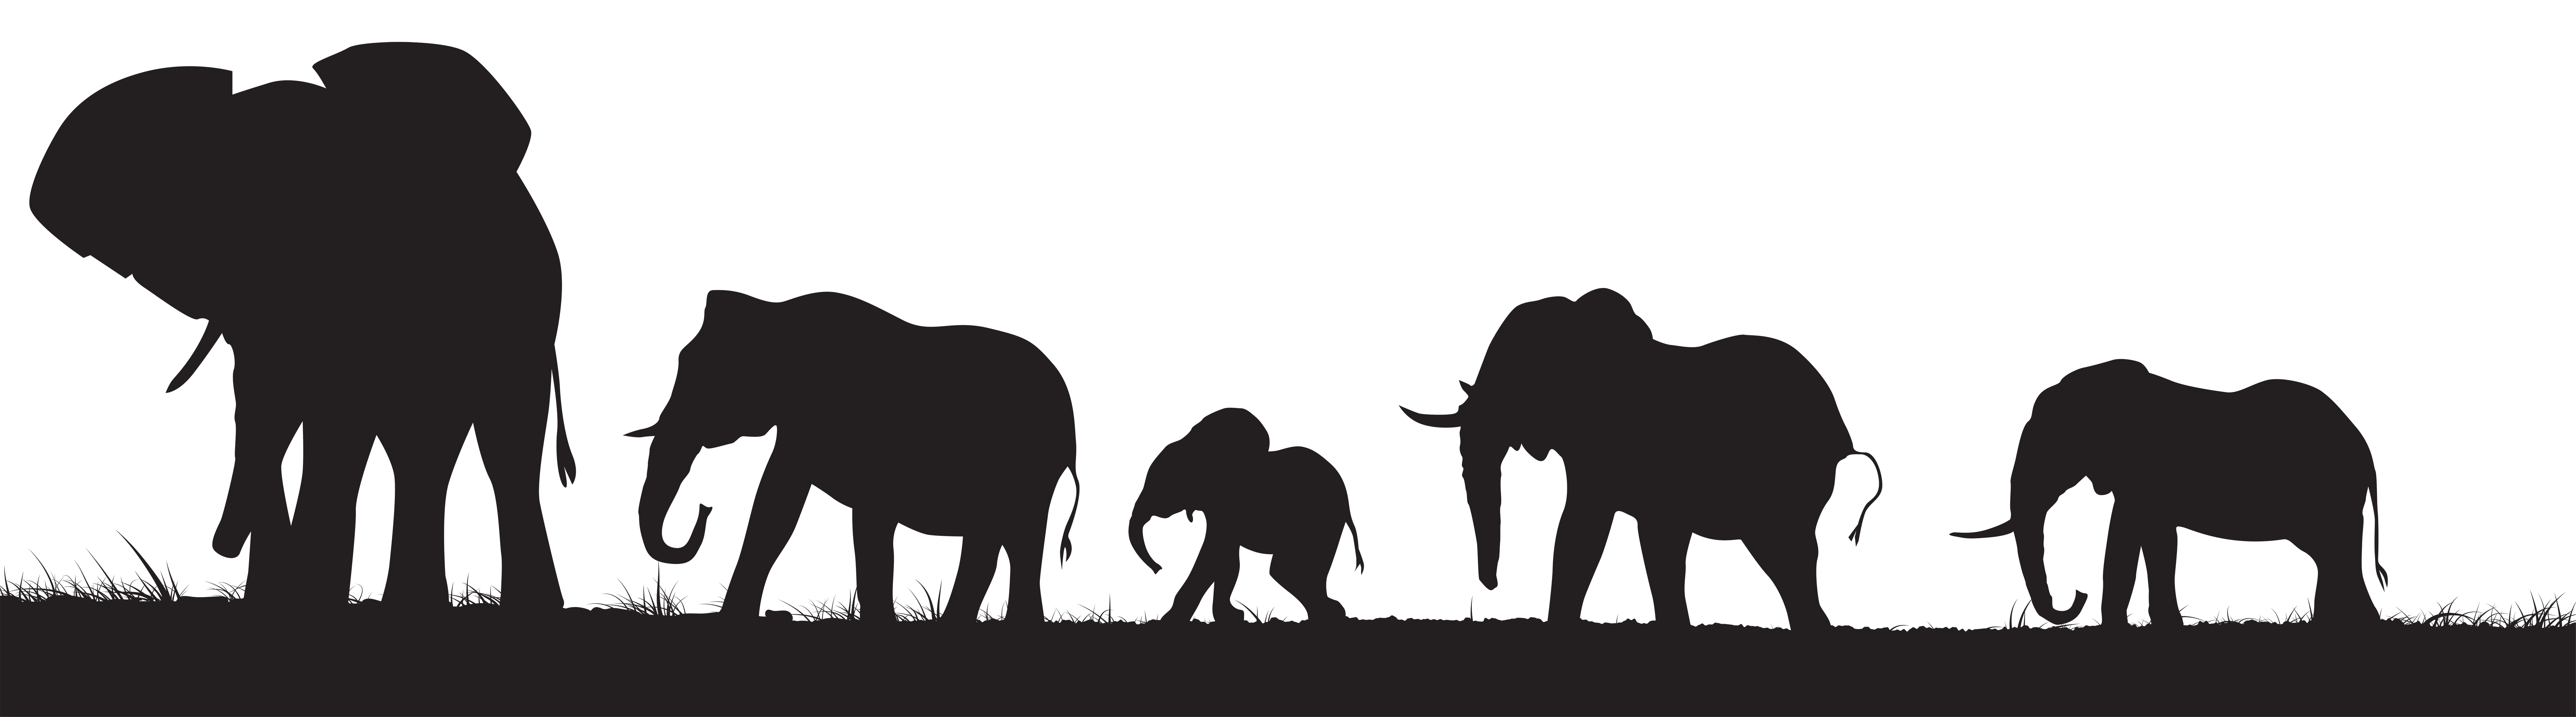 Free Elephant Silhouettes Cliparts, Download Free Elephant Silhouettes